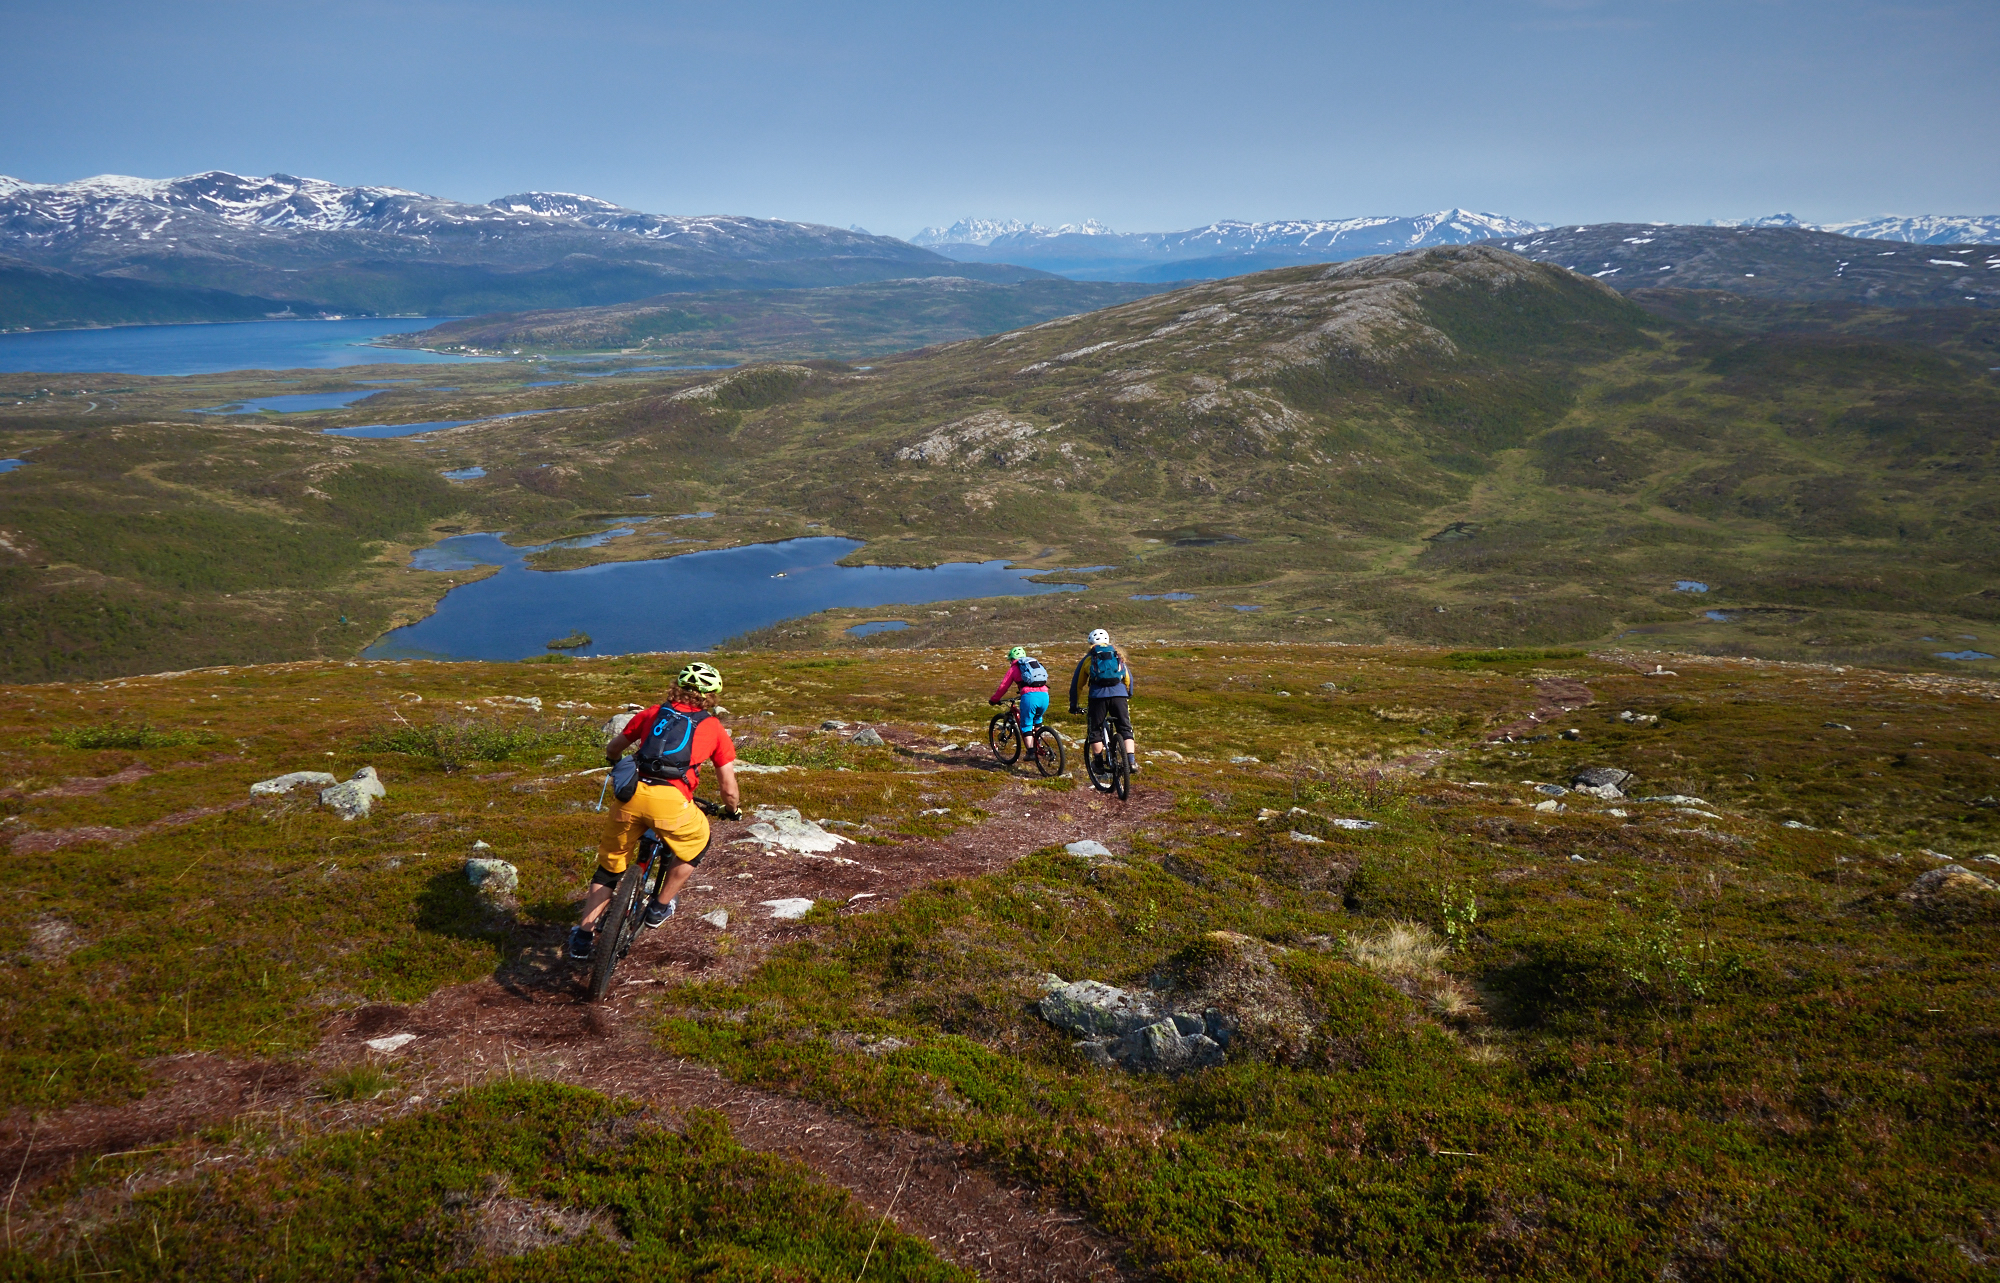 Chasing Linnea and Gustav on Nordtinden, photo by Andrea